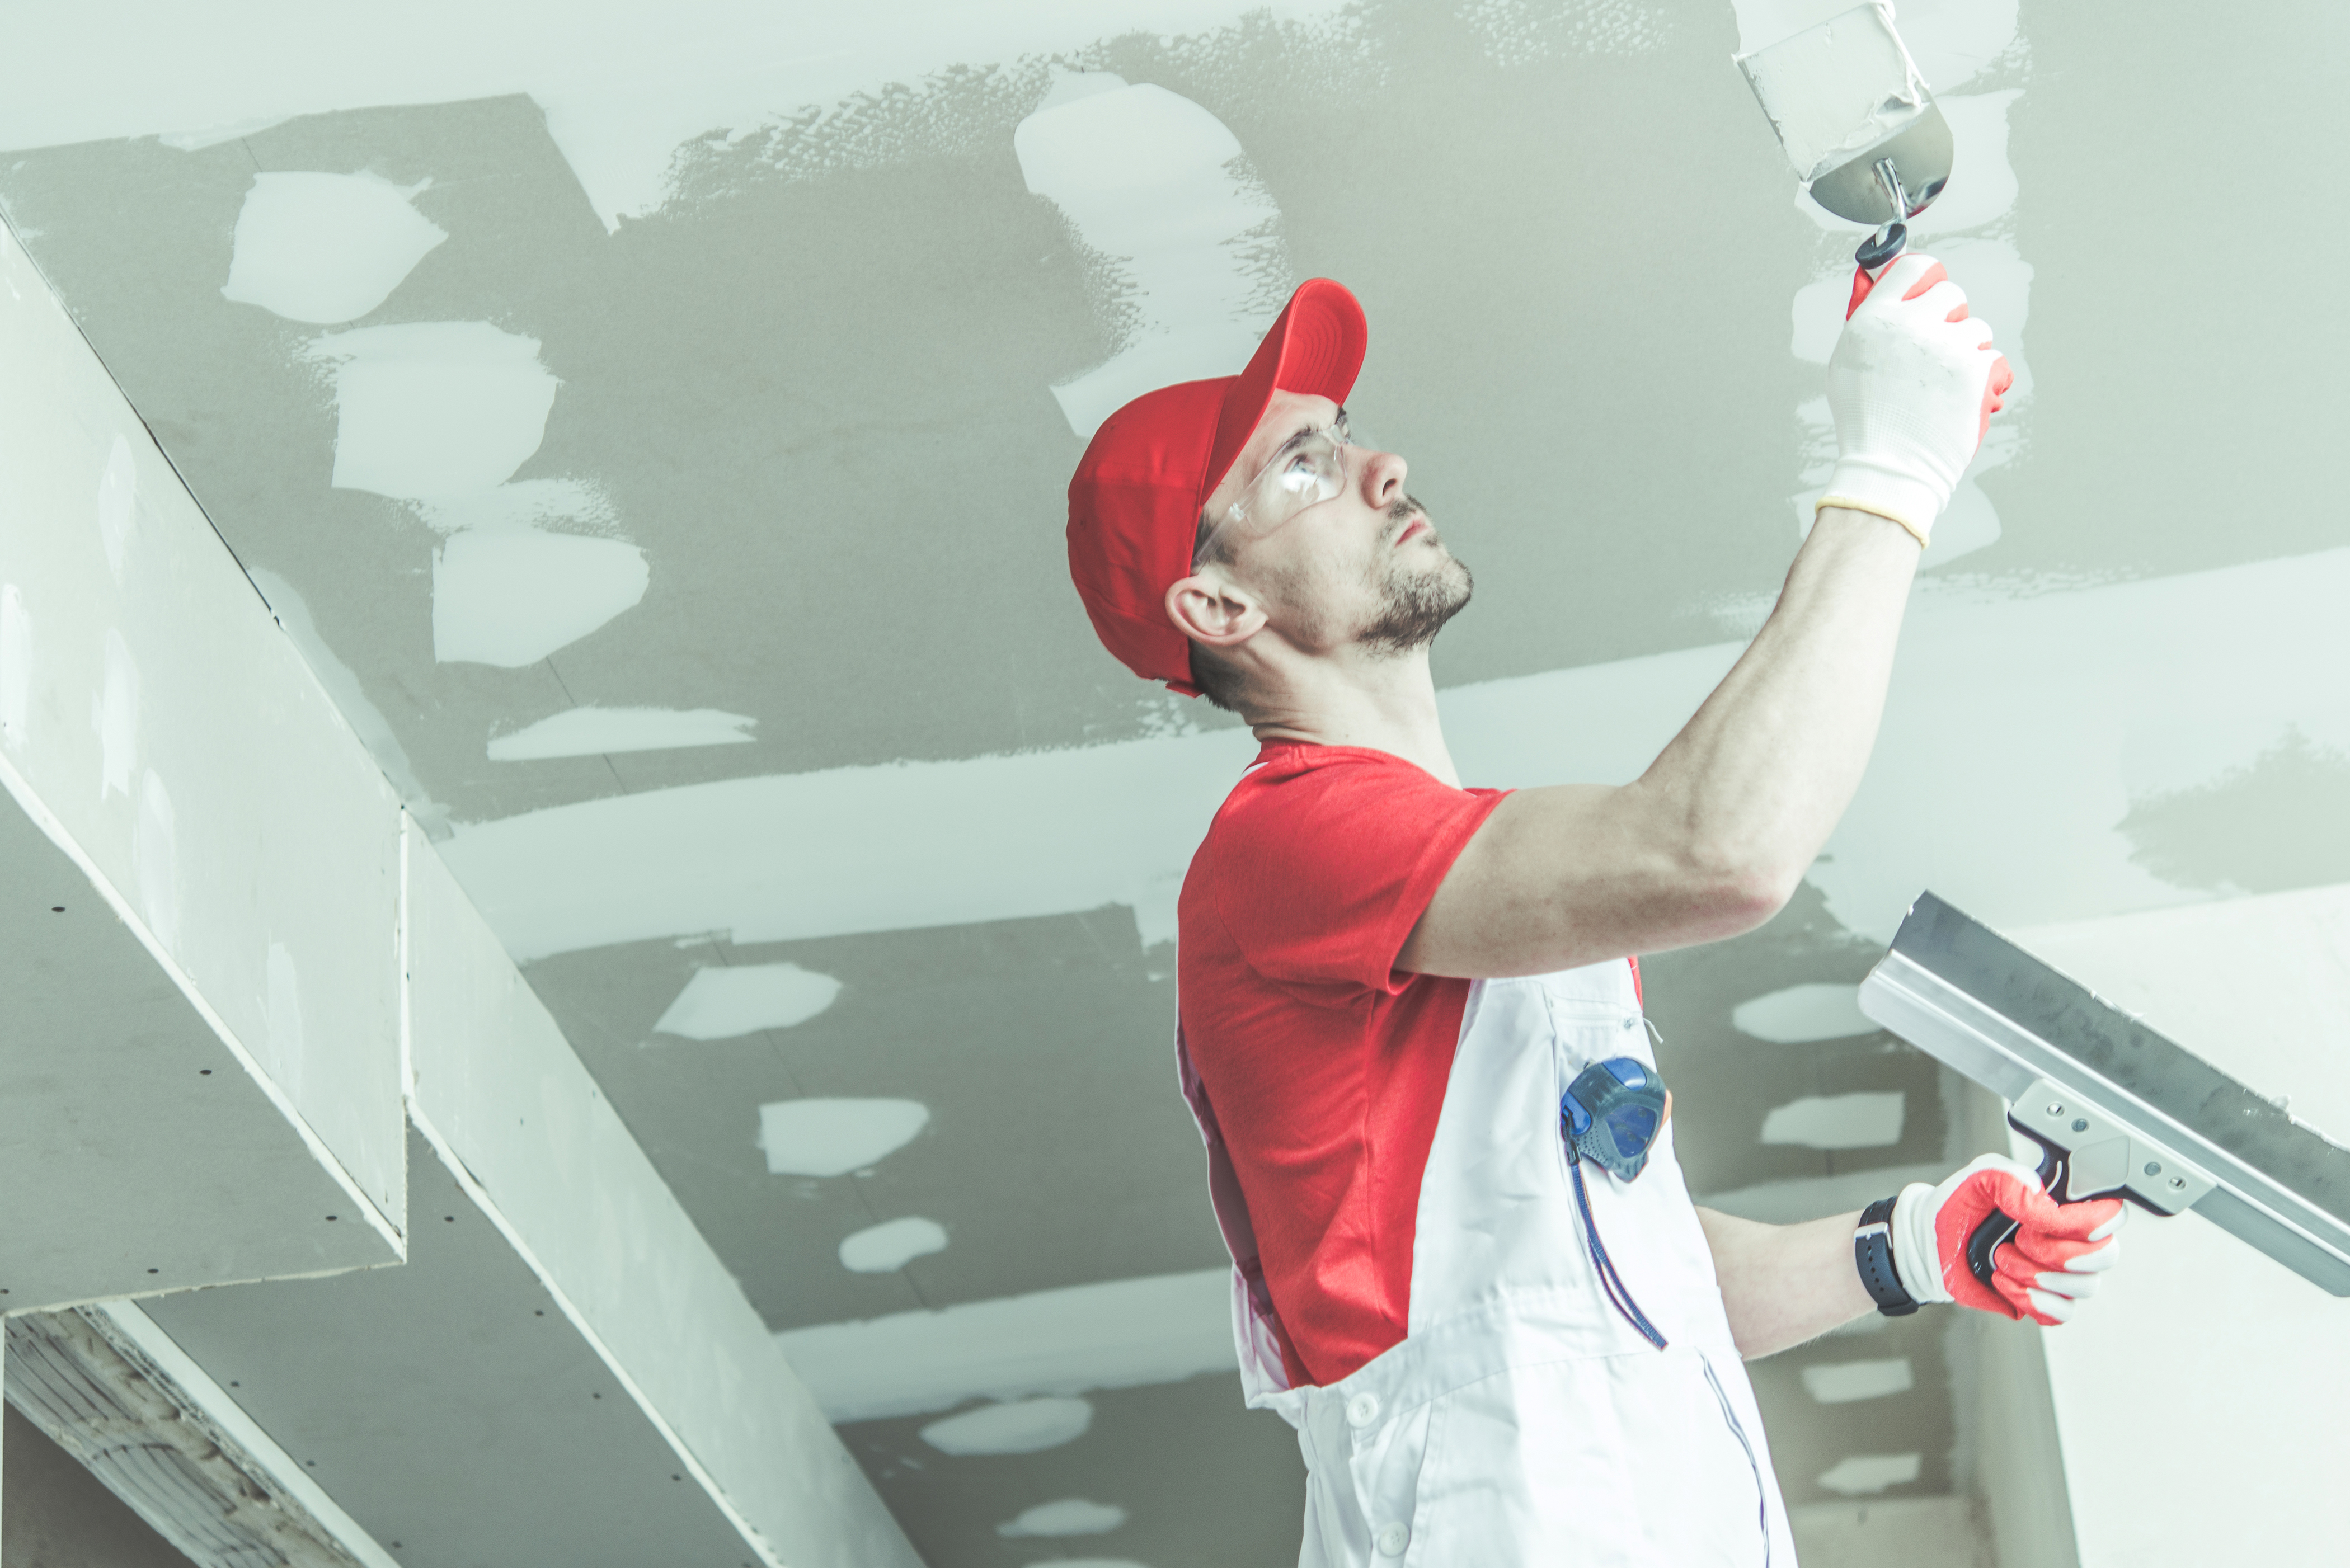 One of the members of the Best Drywall Finishers In Ottawa, wears a red cap, red shirt, and white coveralls, and is applying drywall compound to drywall / gyprock ceiling joints. In each hand, the finisher is holding different sized drywall trowels.